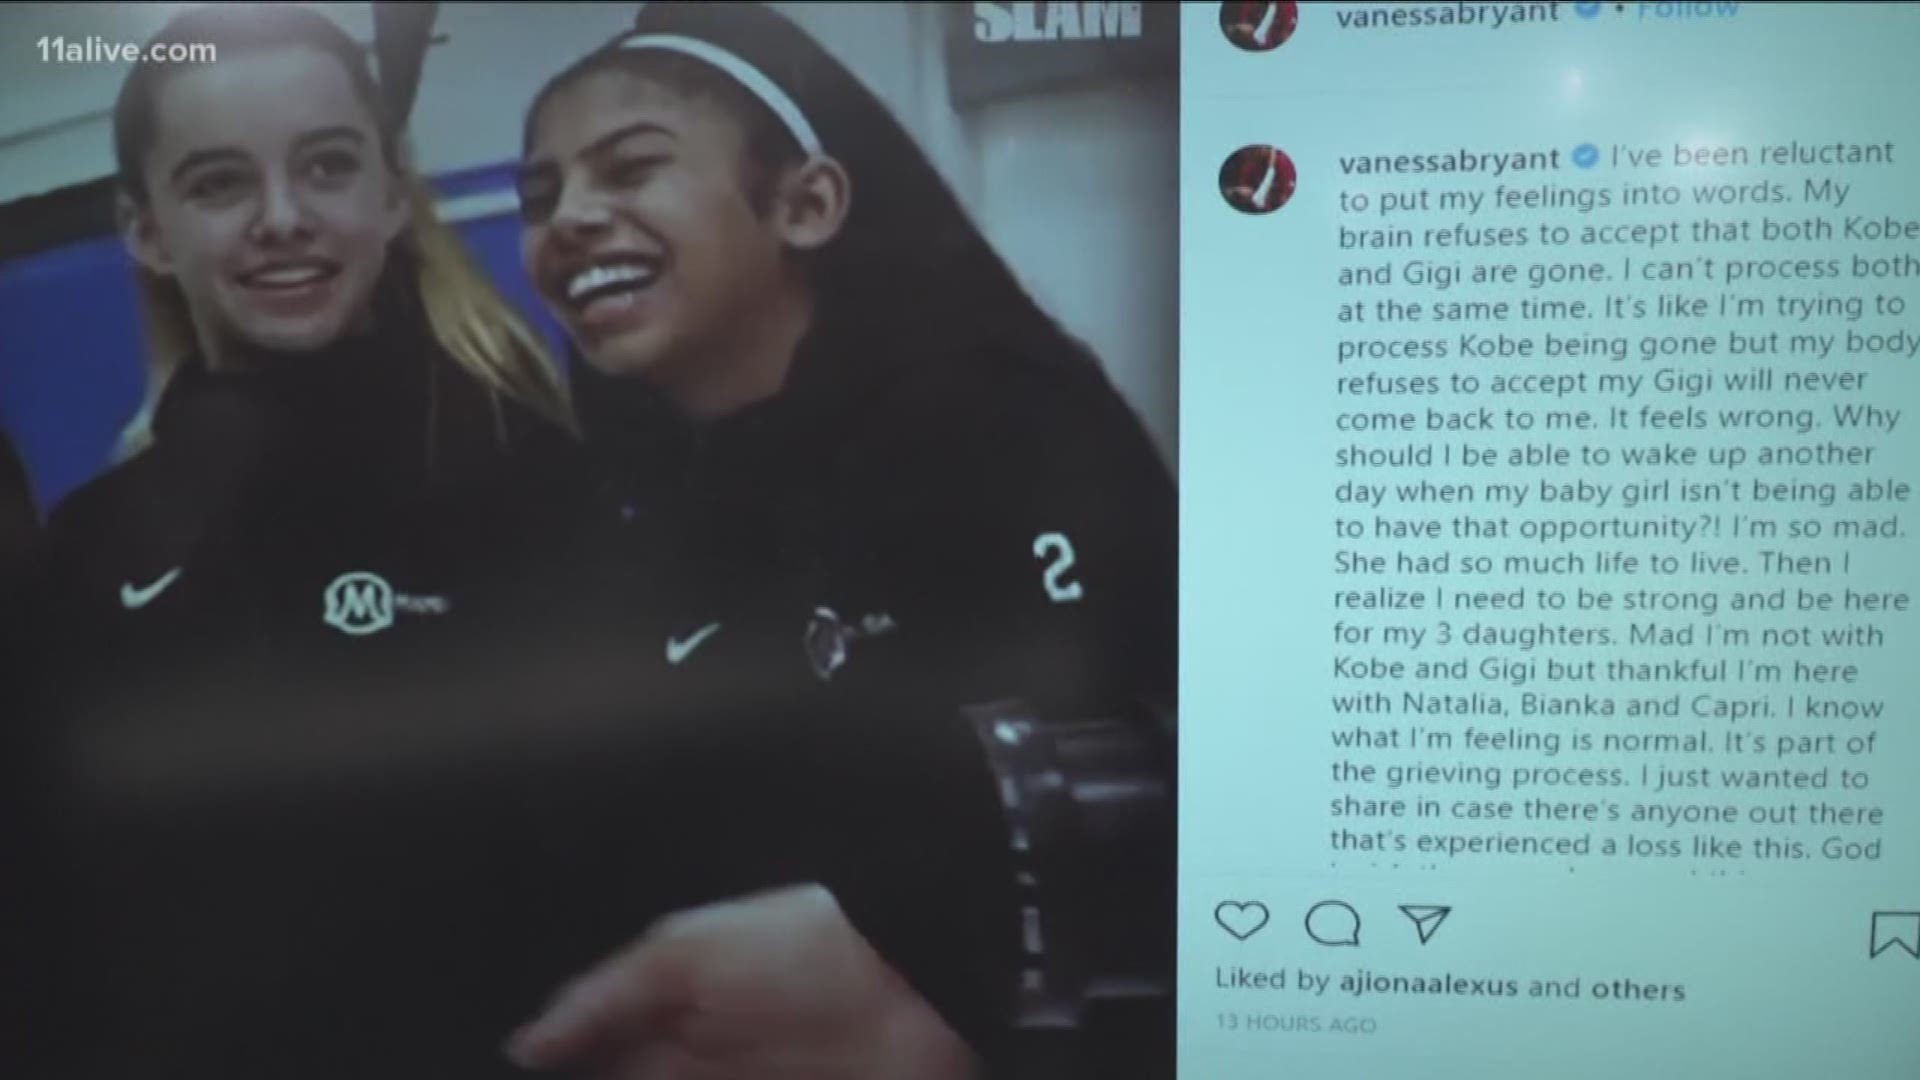 Kobe Bryant's widow also says she is standing strong for her other three daughters in an Instagram post.